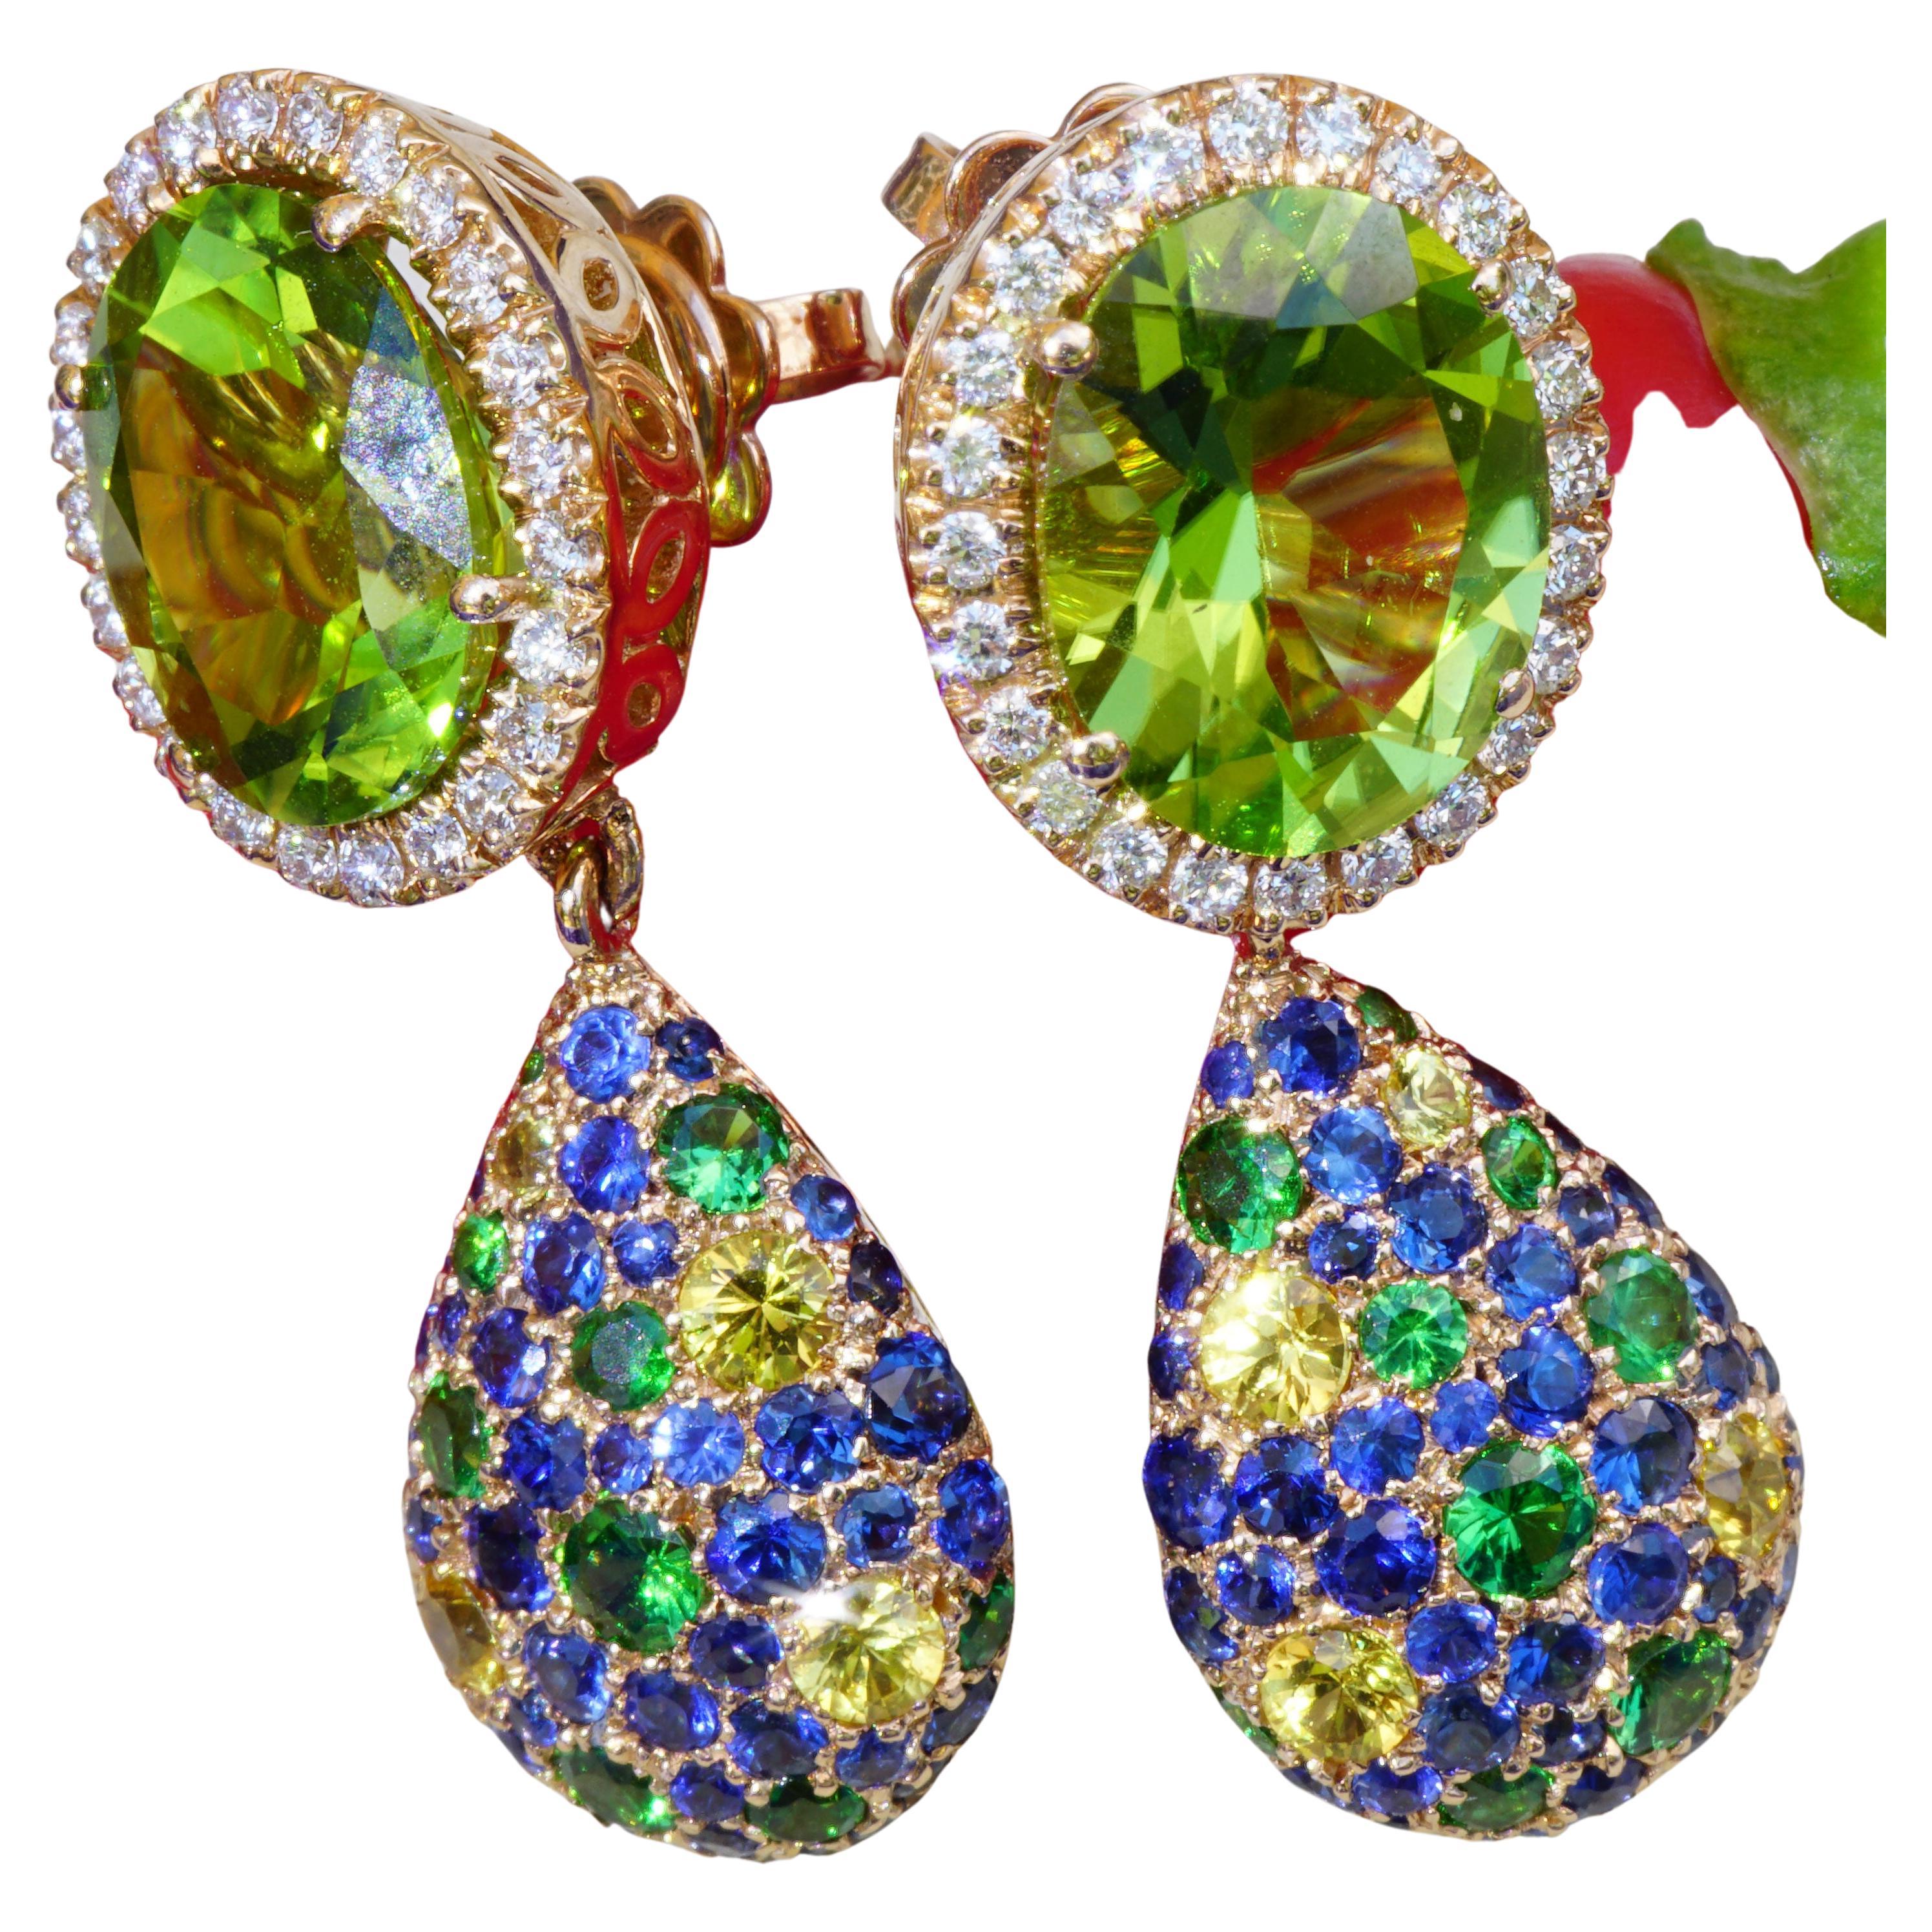 Peridot Saphire Diamond Earrings 7.50 ct 0.36 TW VS AAA+ Most Beautiful Color For Sale